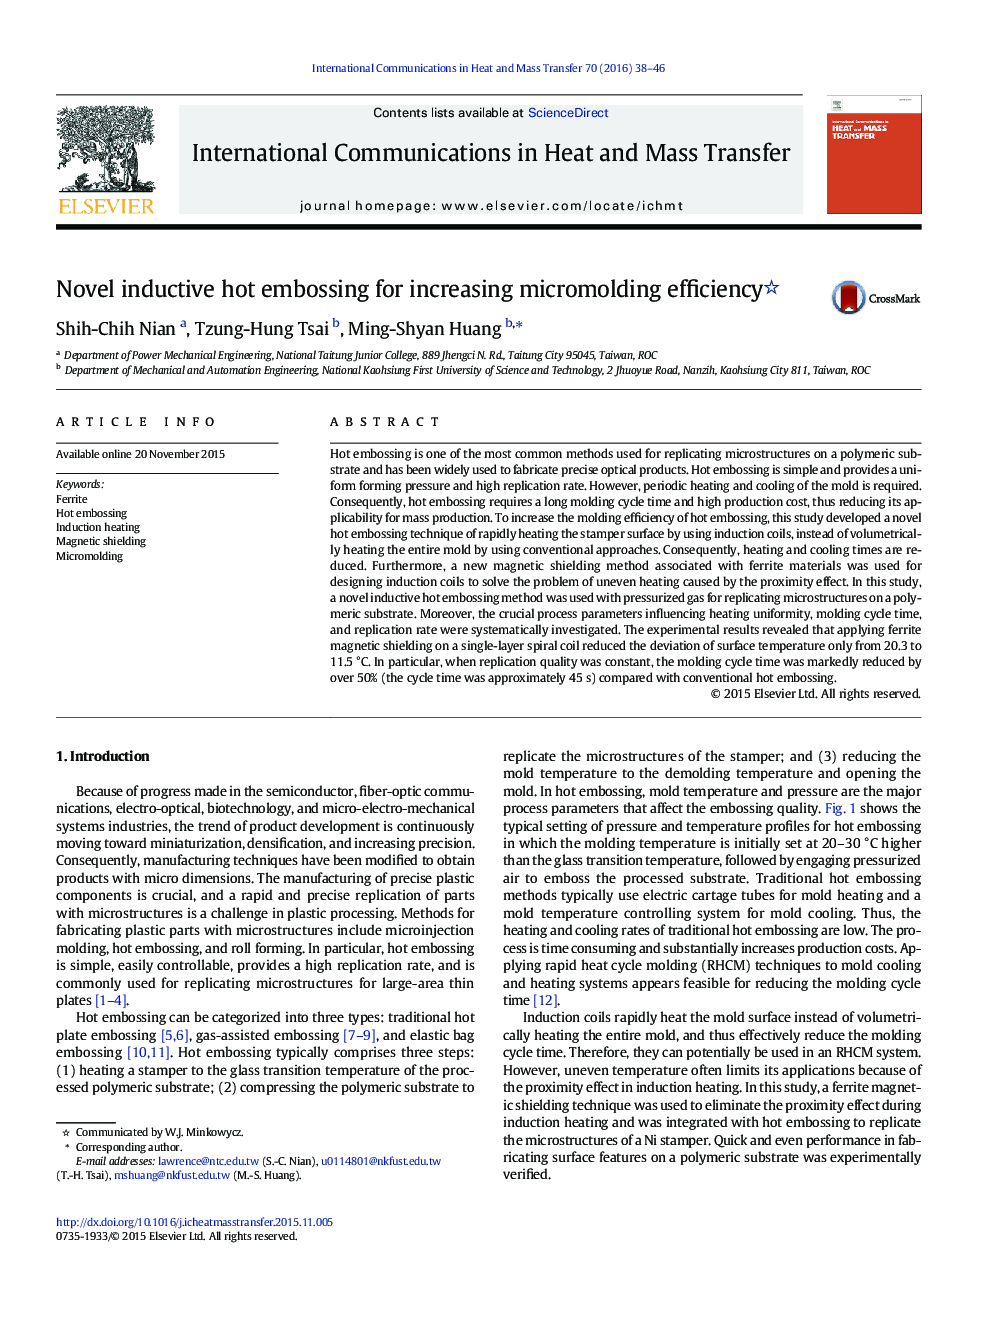 Novel inductive hot embossing for increasing micromolding efficiency 